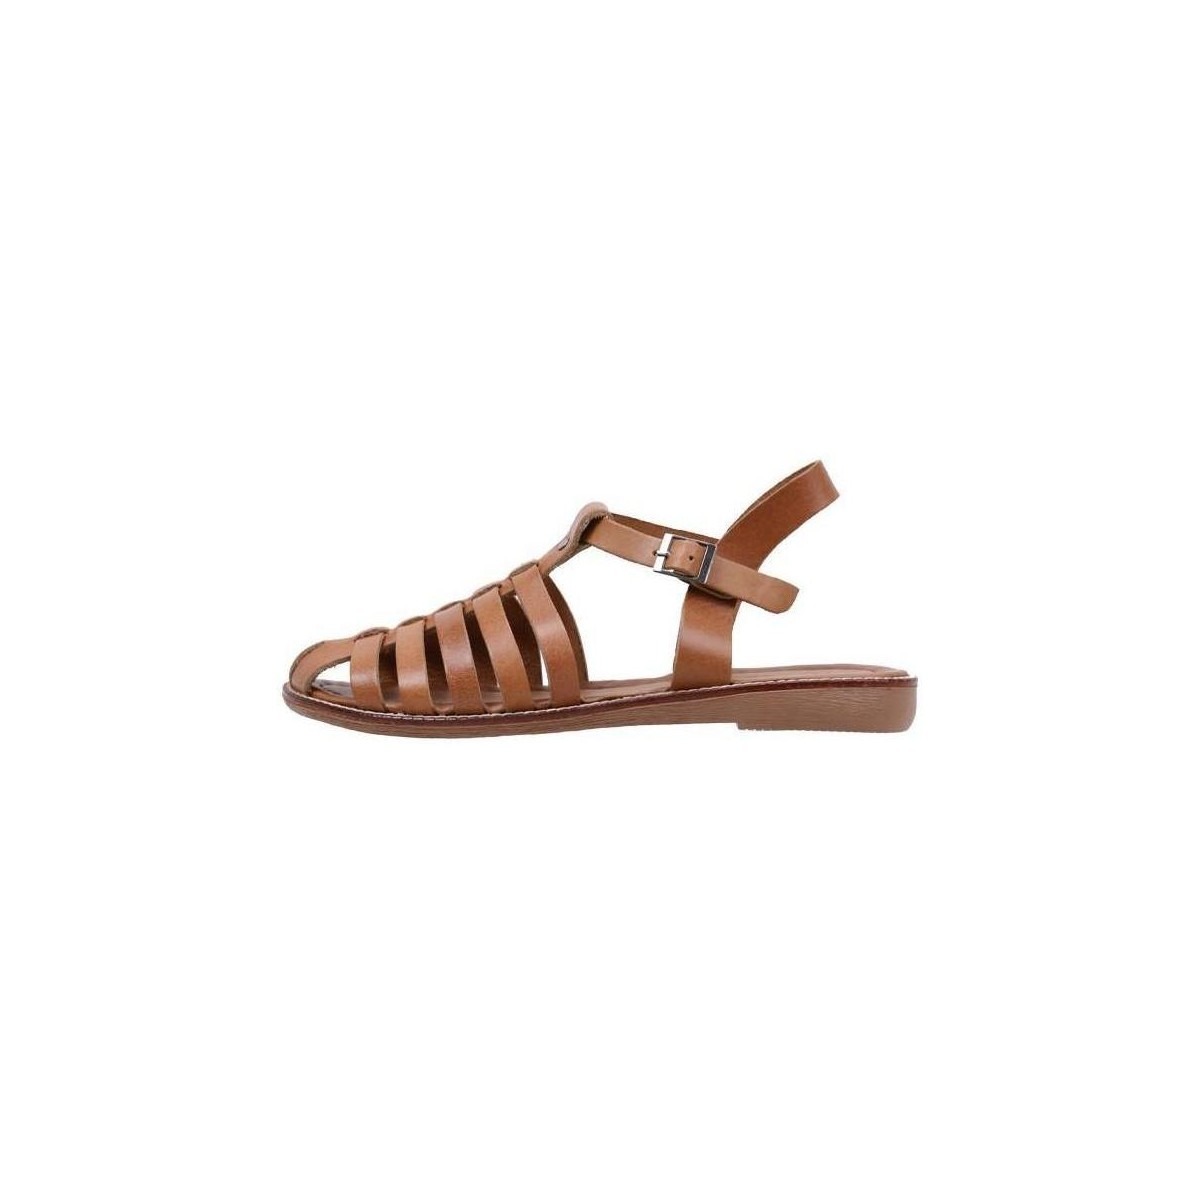 Spartoo Sandals in Brown from Krack GOOFASH